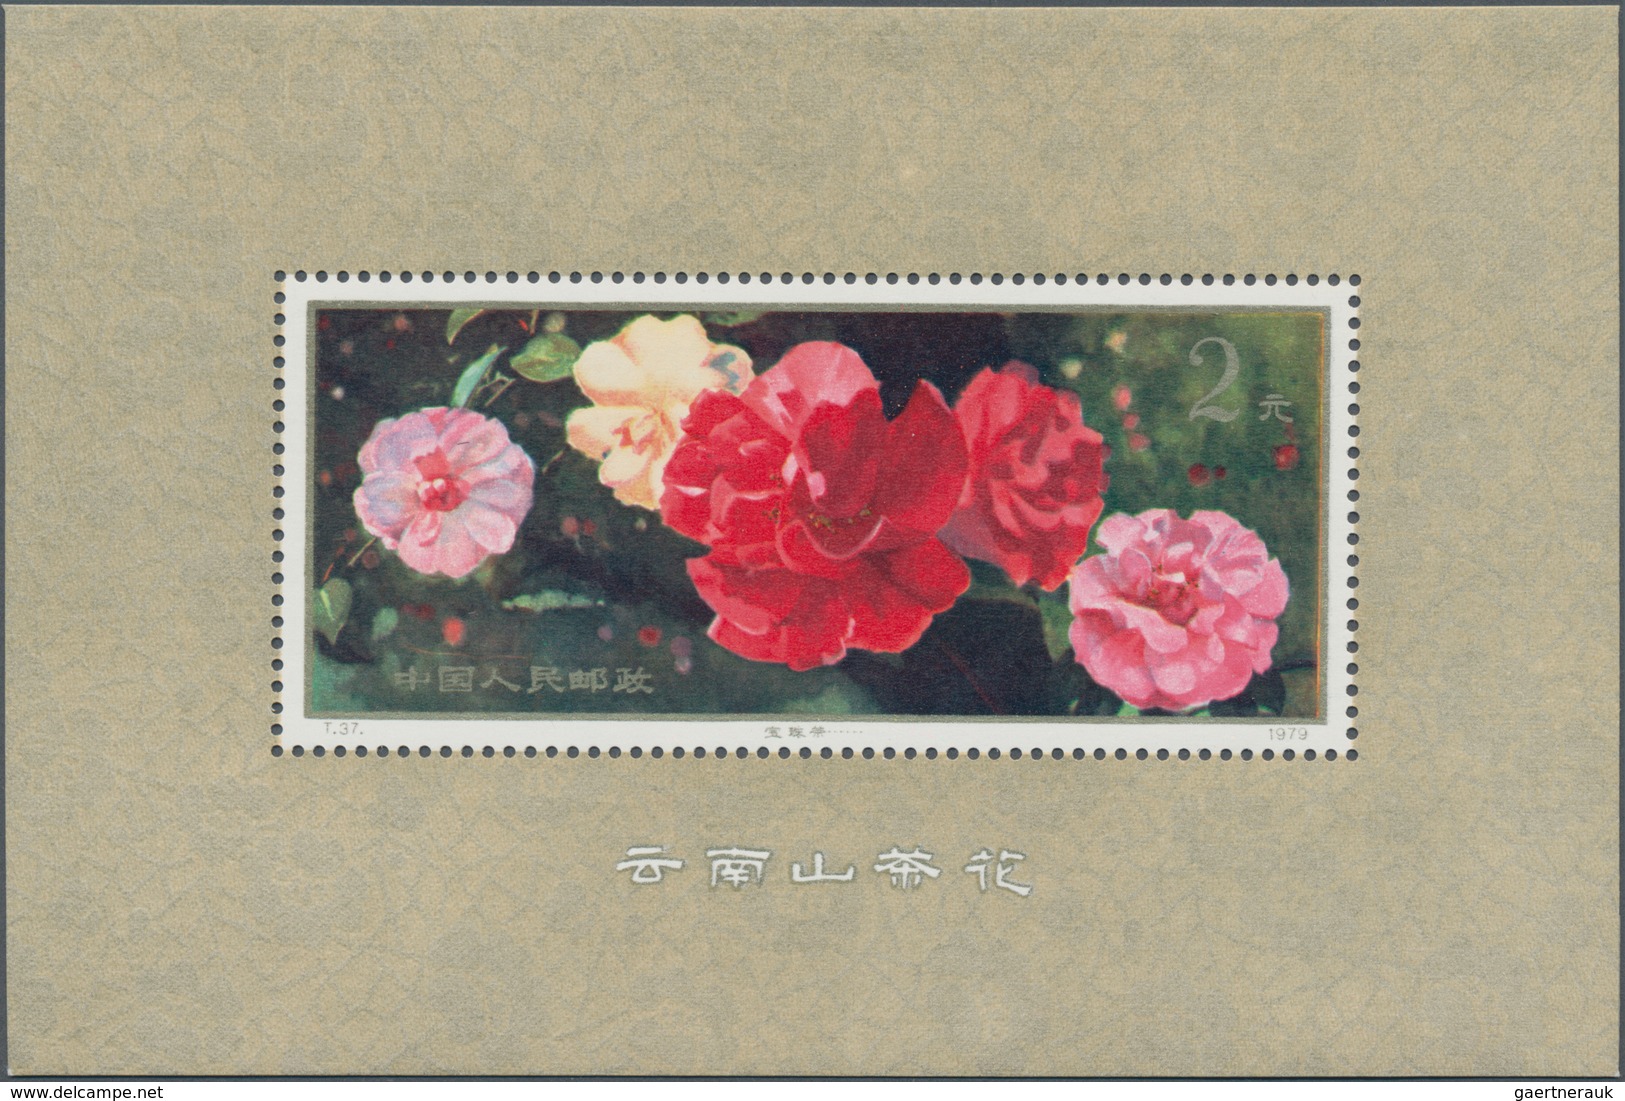 China - Volksrepublik: 1978/81, 9 s/s, including the Galloping Horses (T28M), and Study of Science f